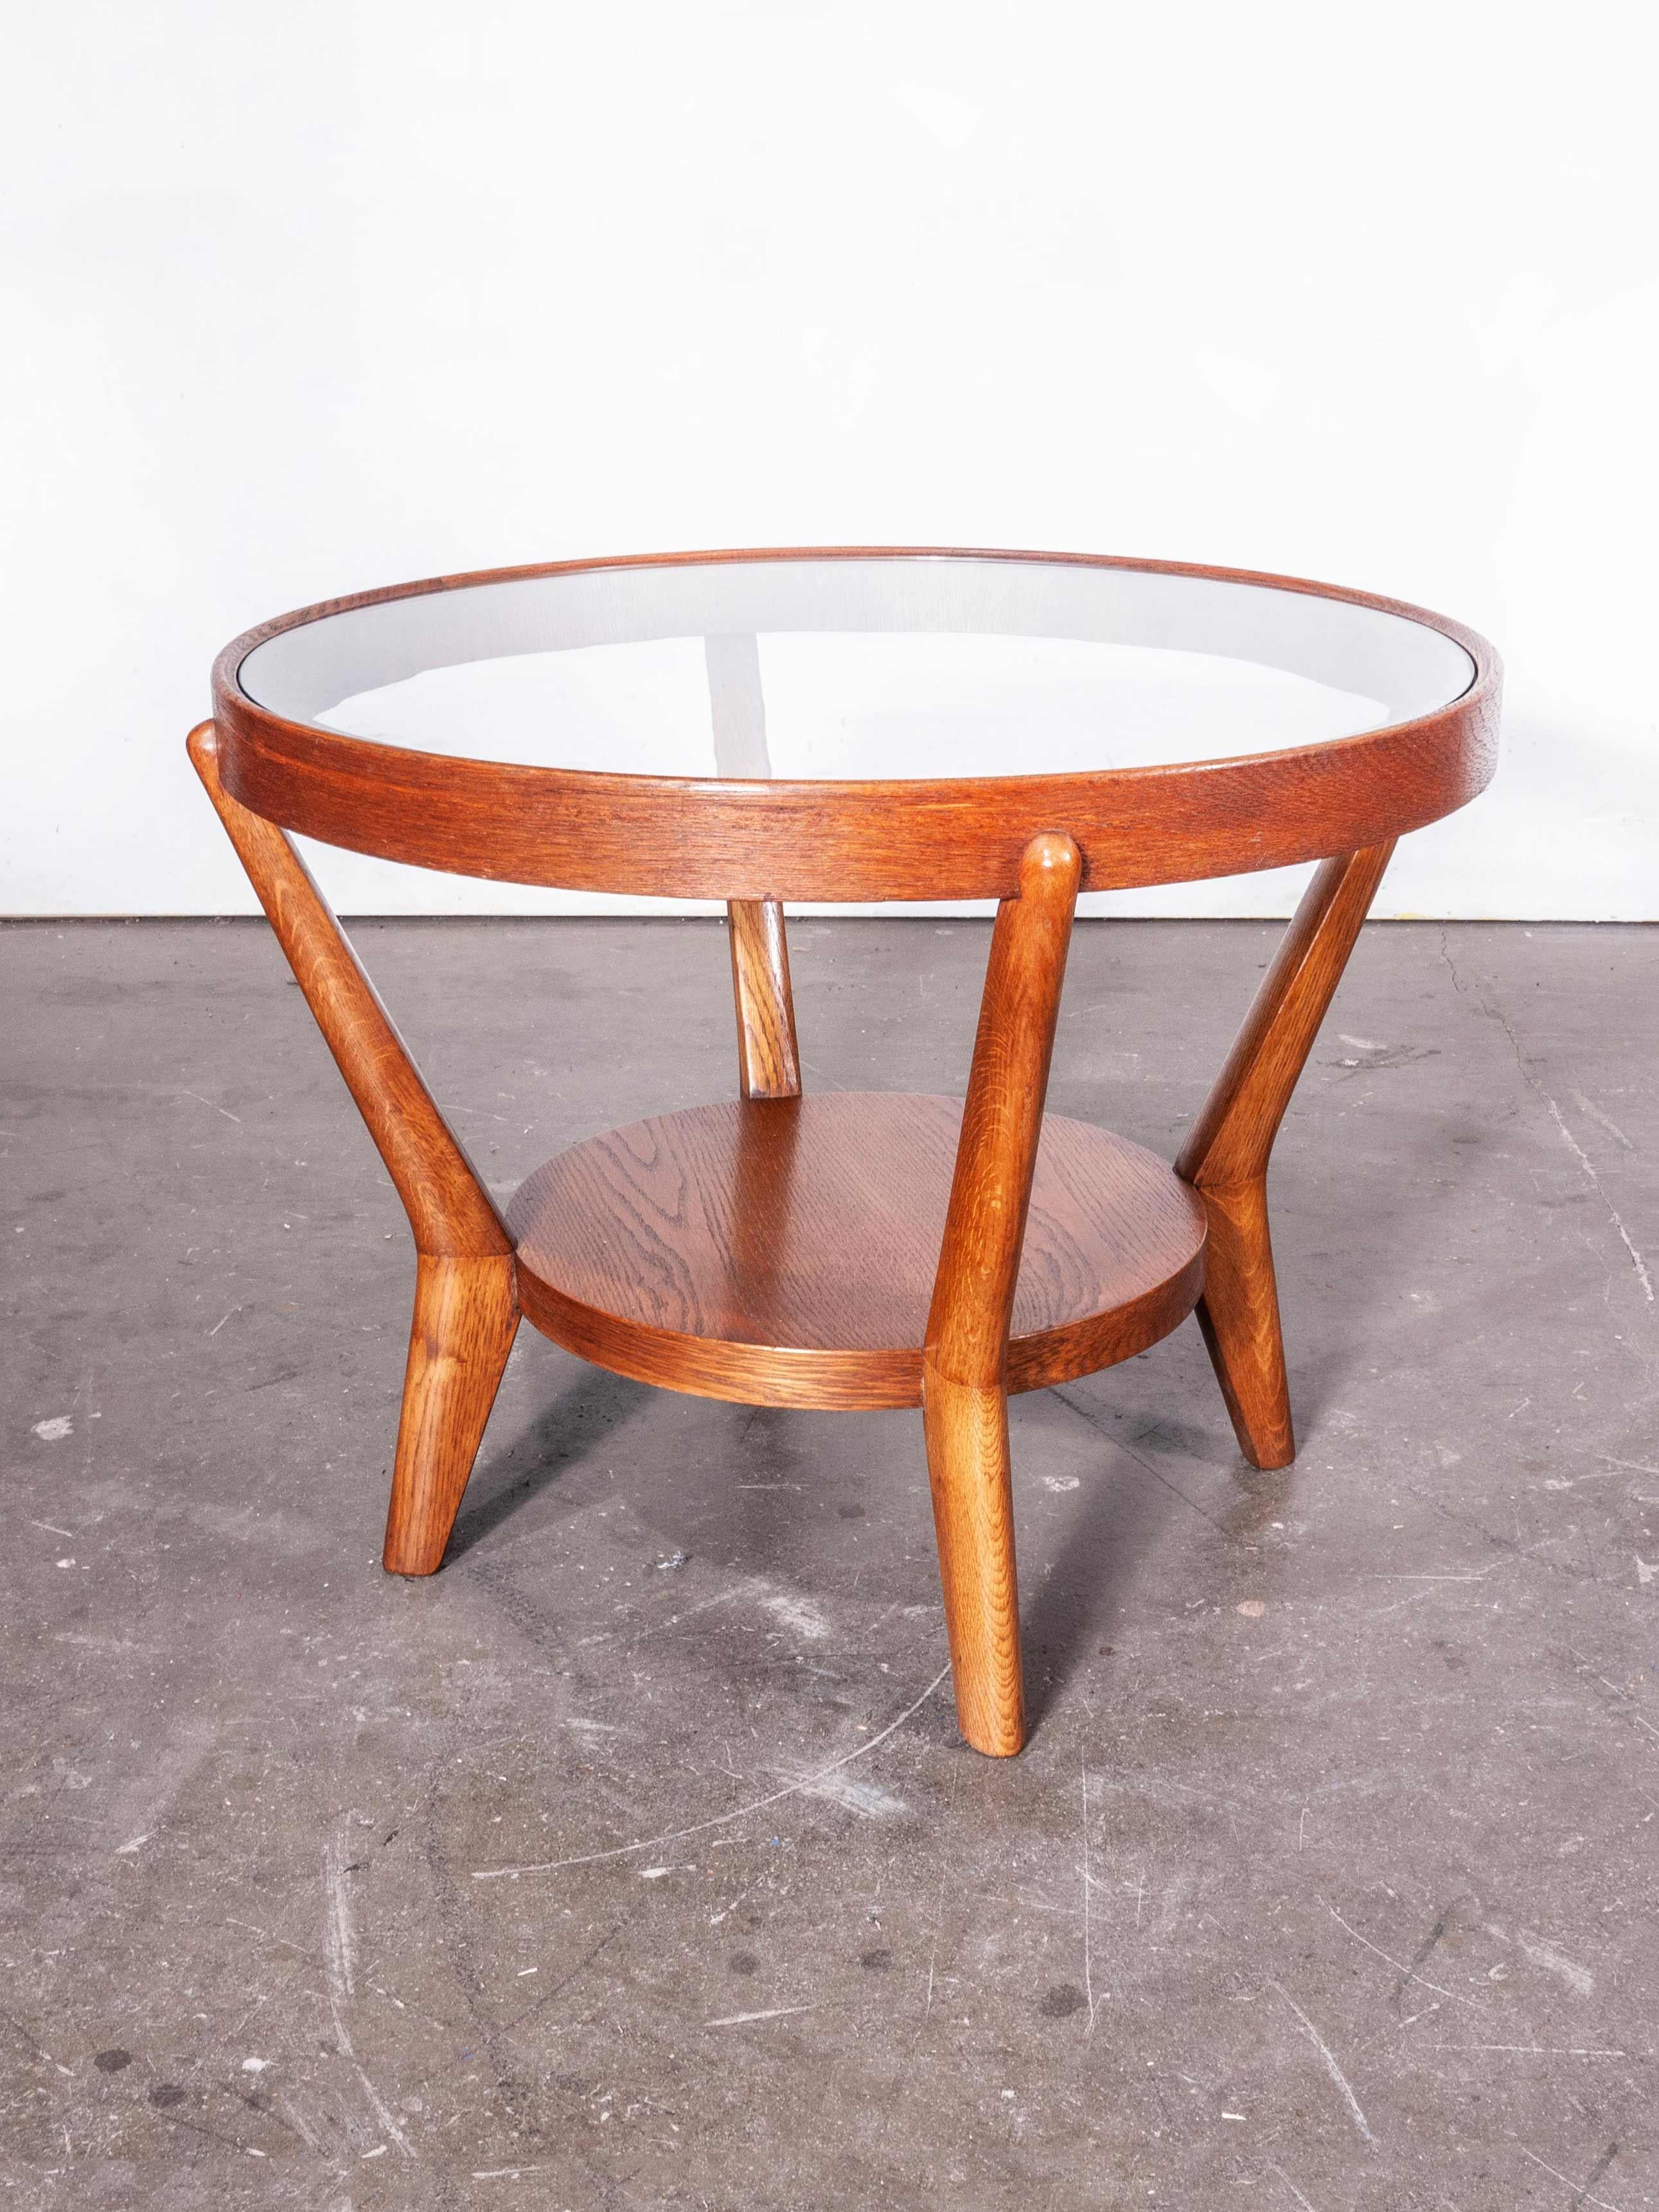 Mid-20th Century 1950s Round Occasional Table by Kozelka and Kropacek for Interieur Praha